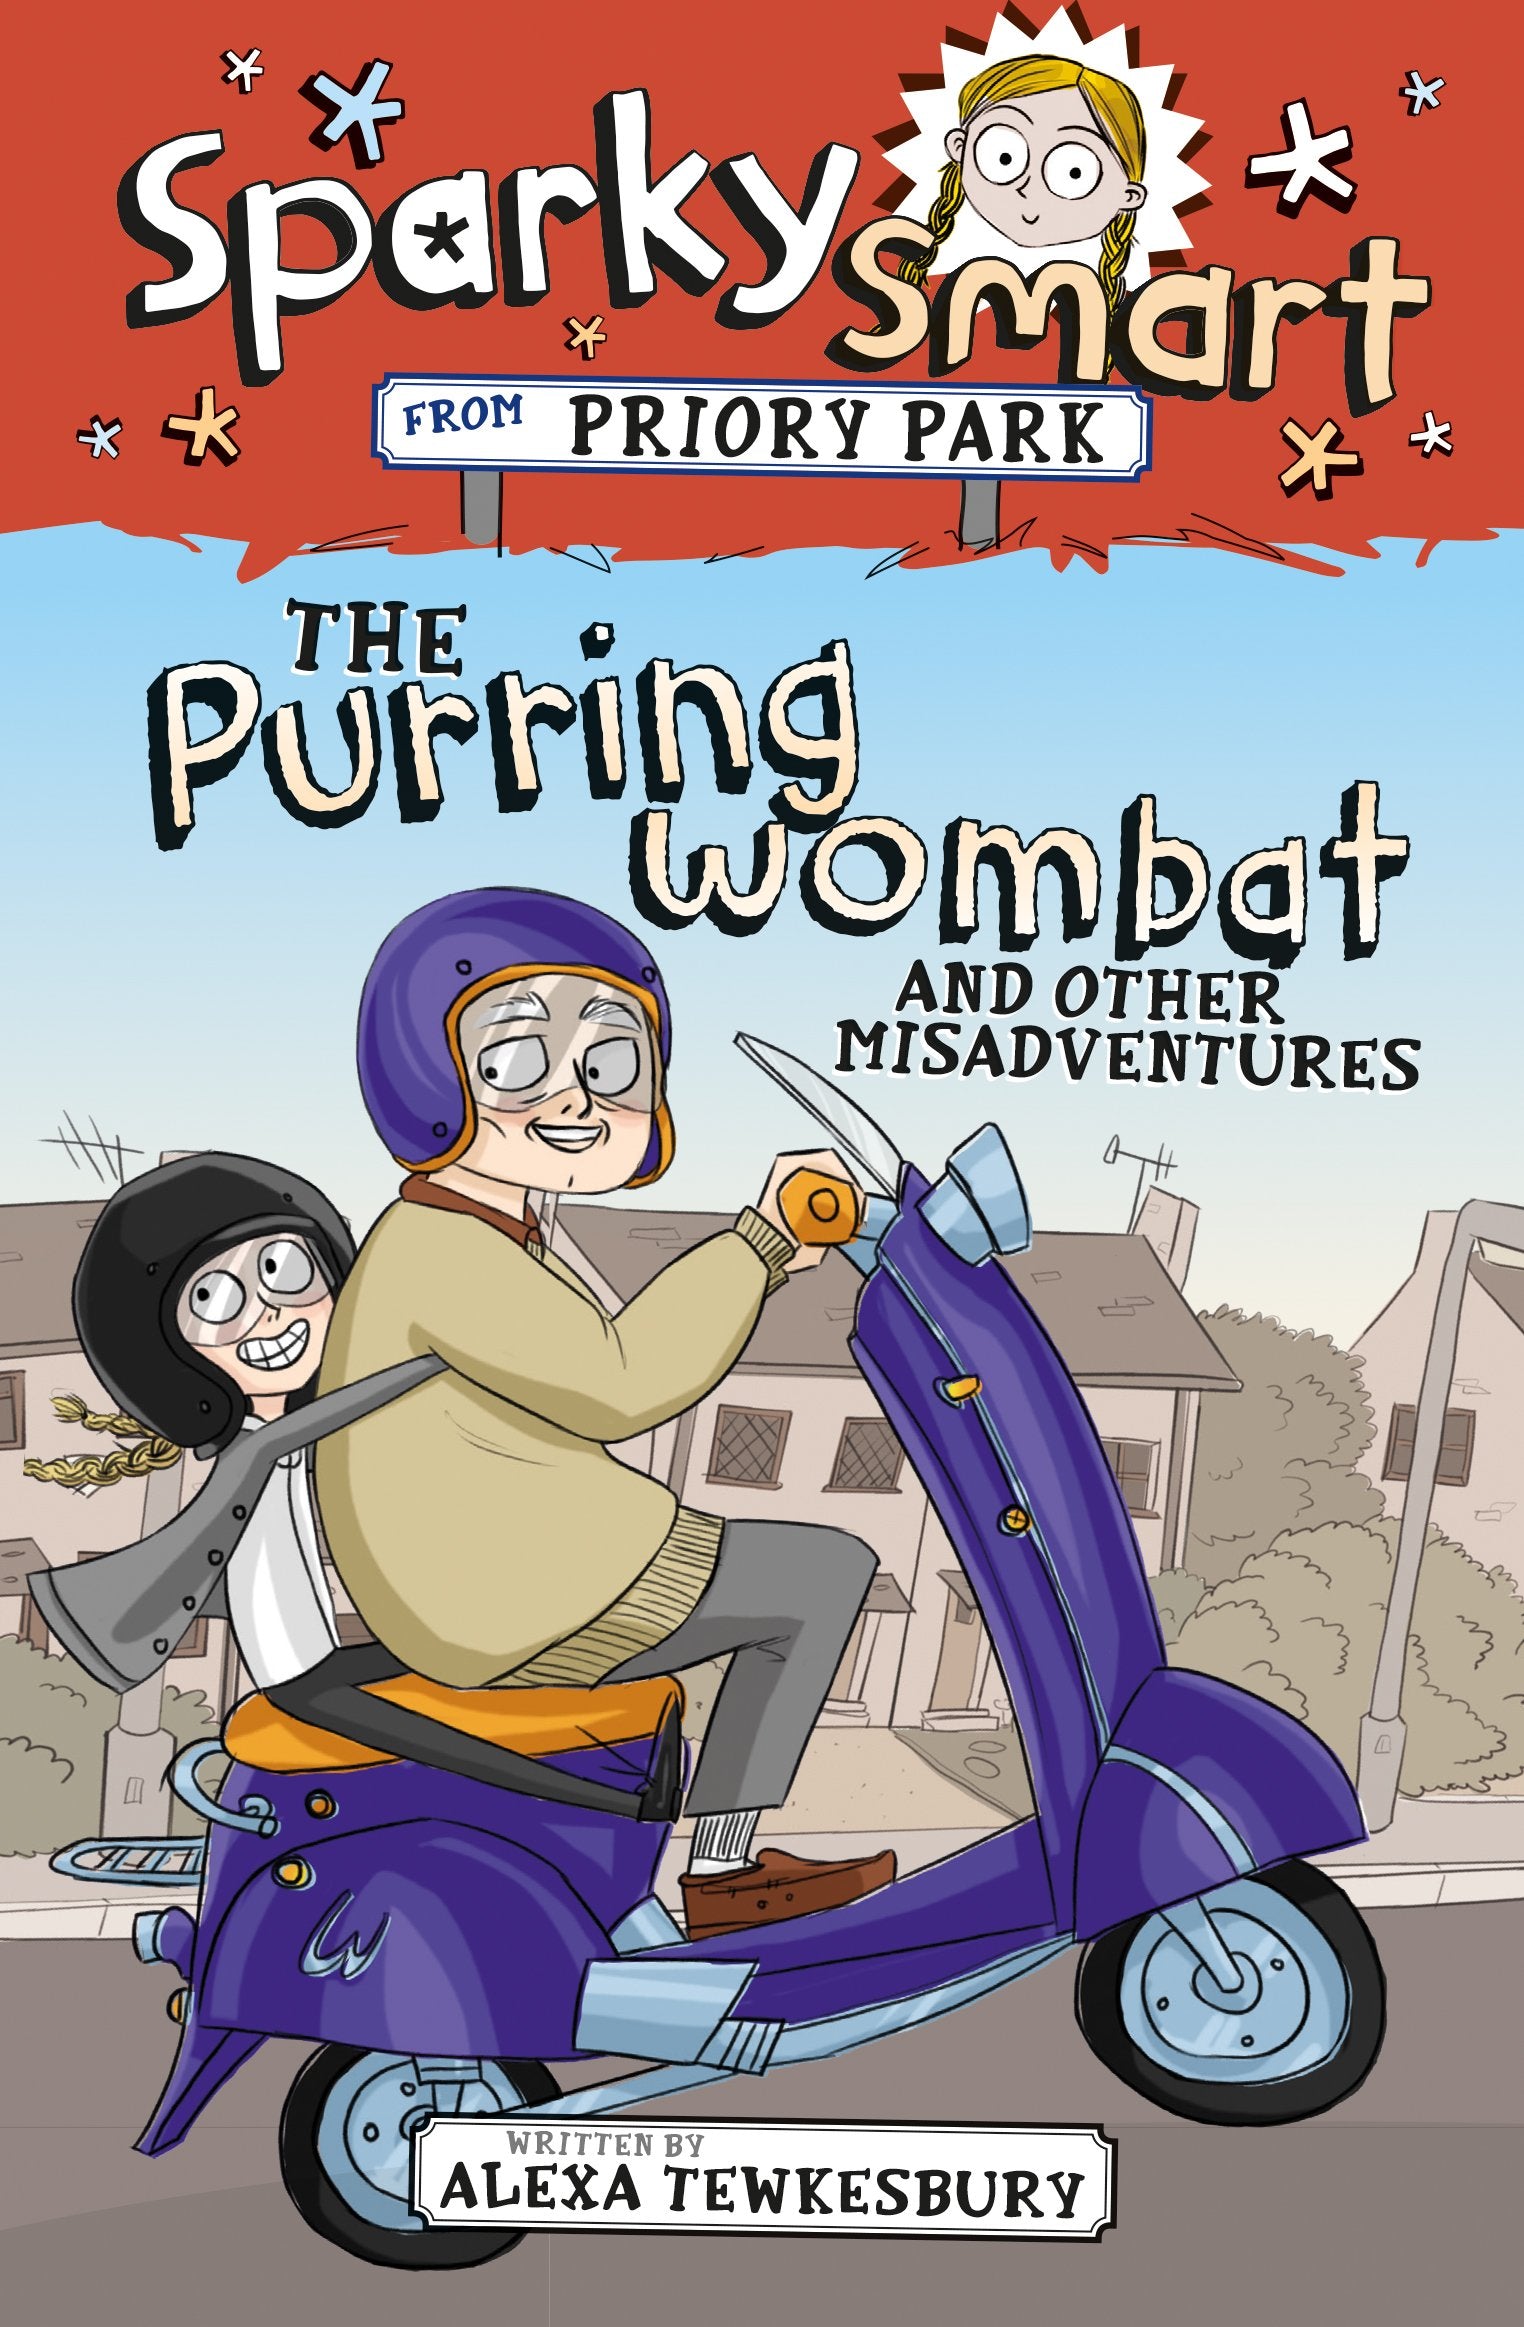 Sparky Smart from Priory Park: The Purring Wombat and other mishaps